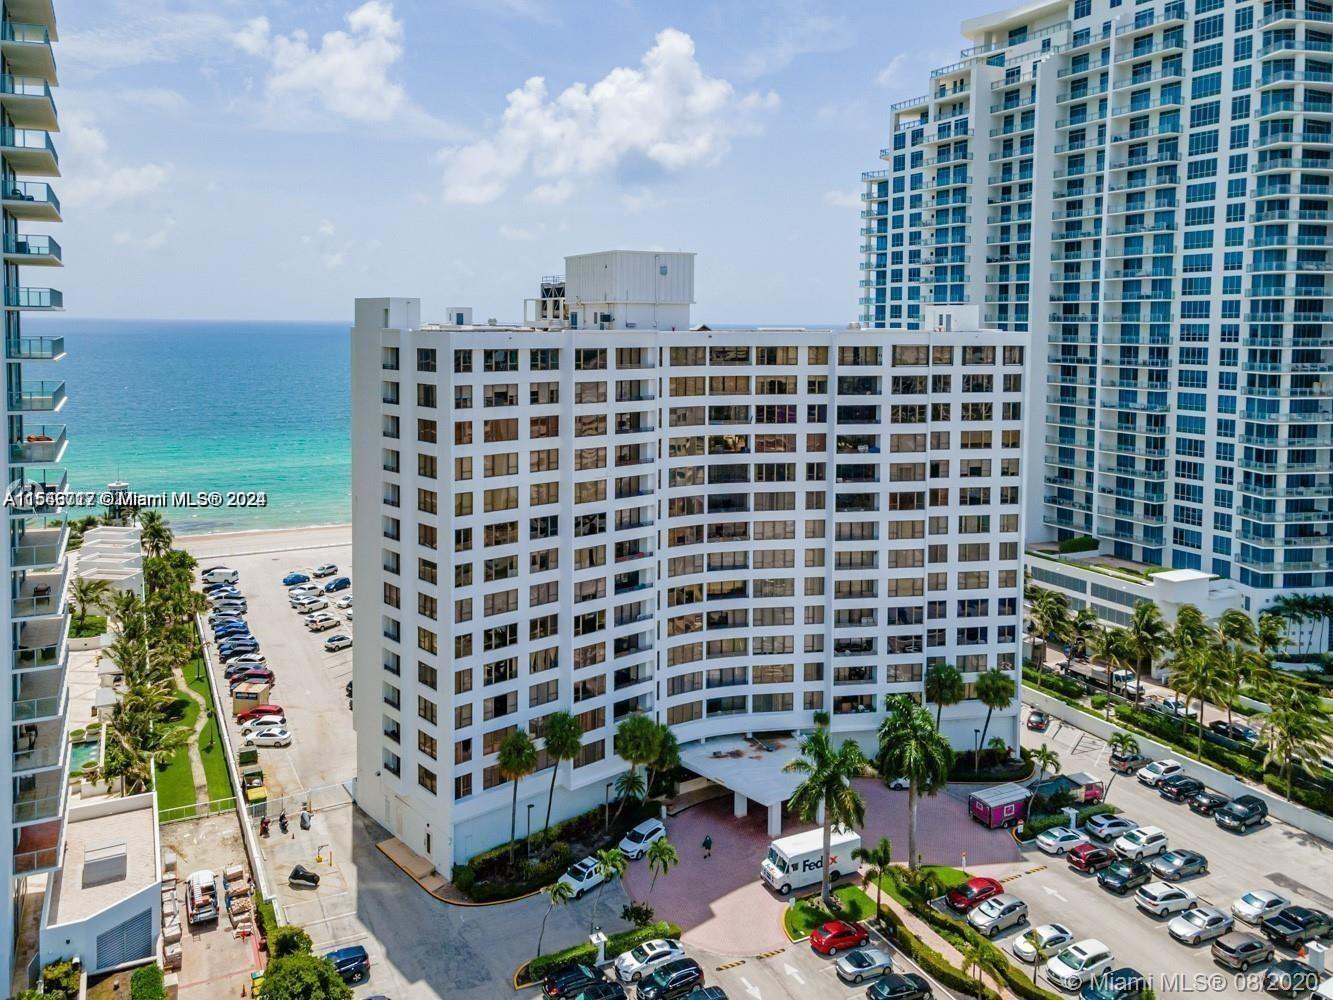 Photo of 3505 S Ocean Dr #401 in Hollywood, FL